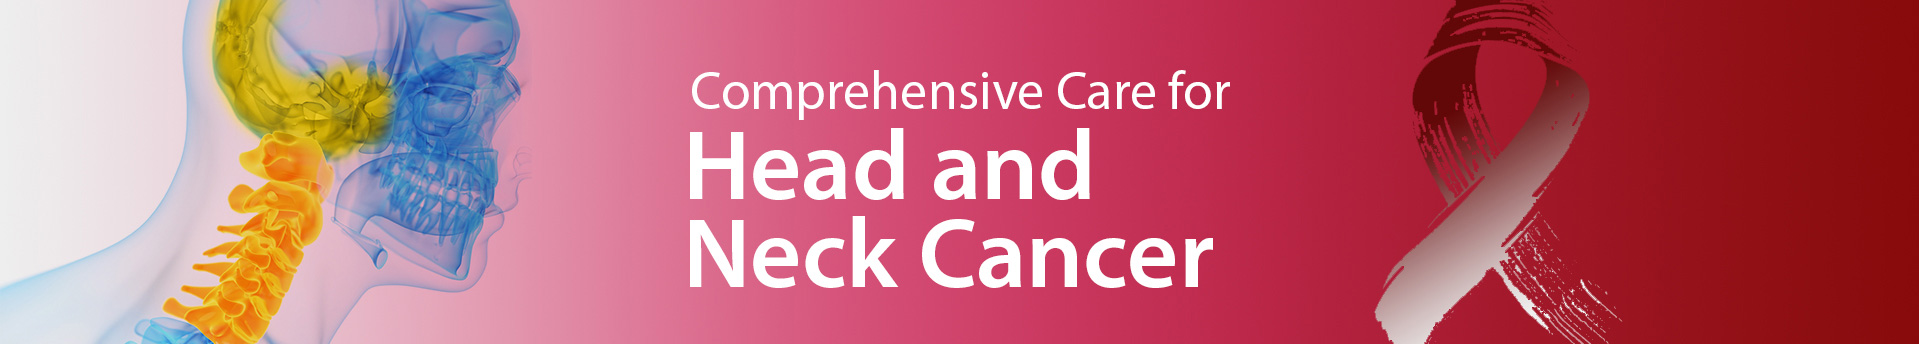 MSH head and neck cancer